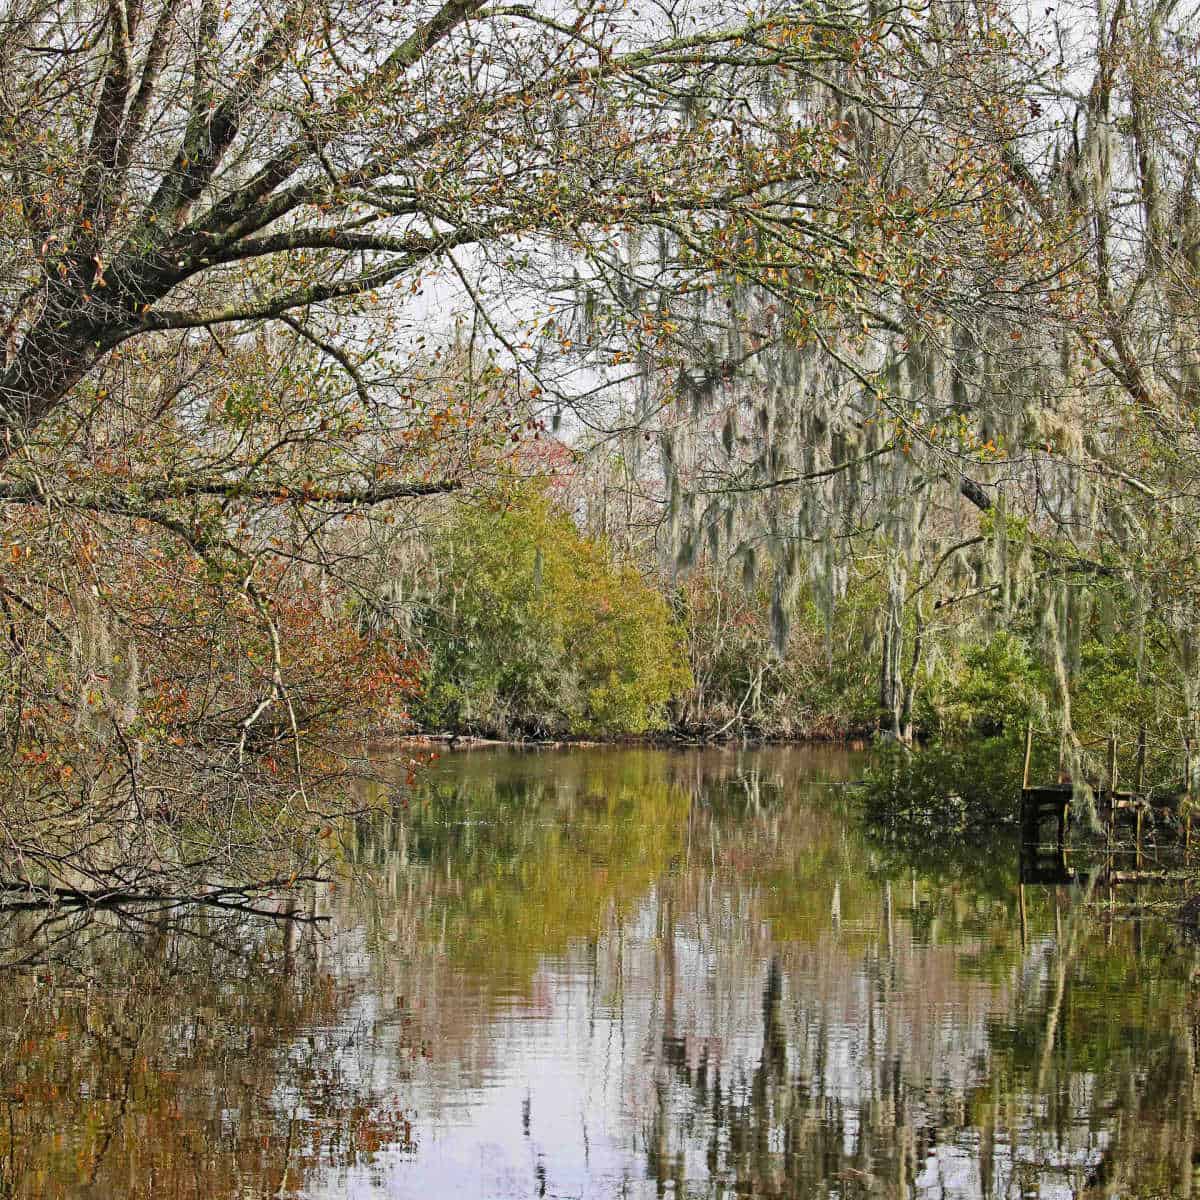 Swamp Tour at Jean Lafitte National Historical Park and Preserve